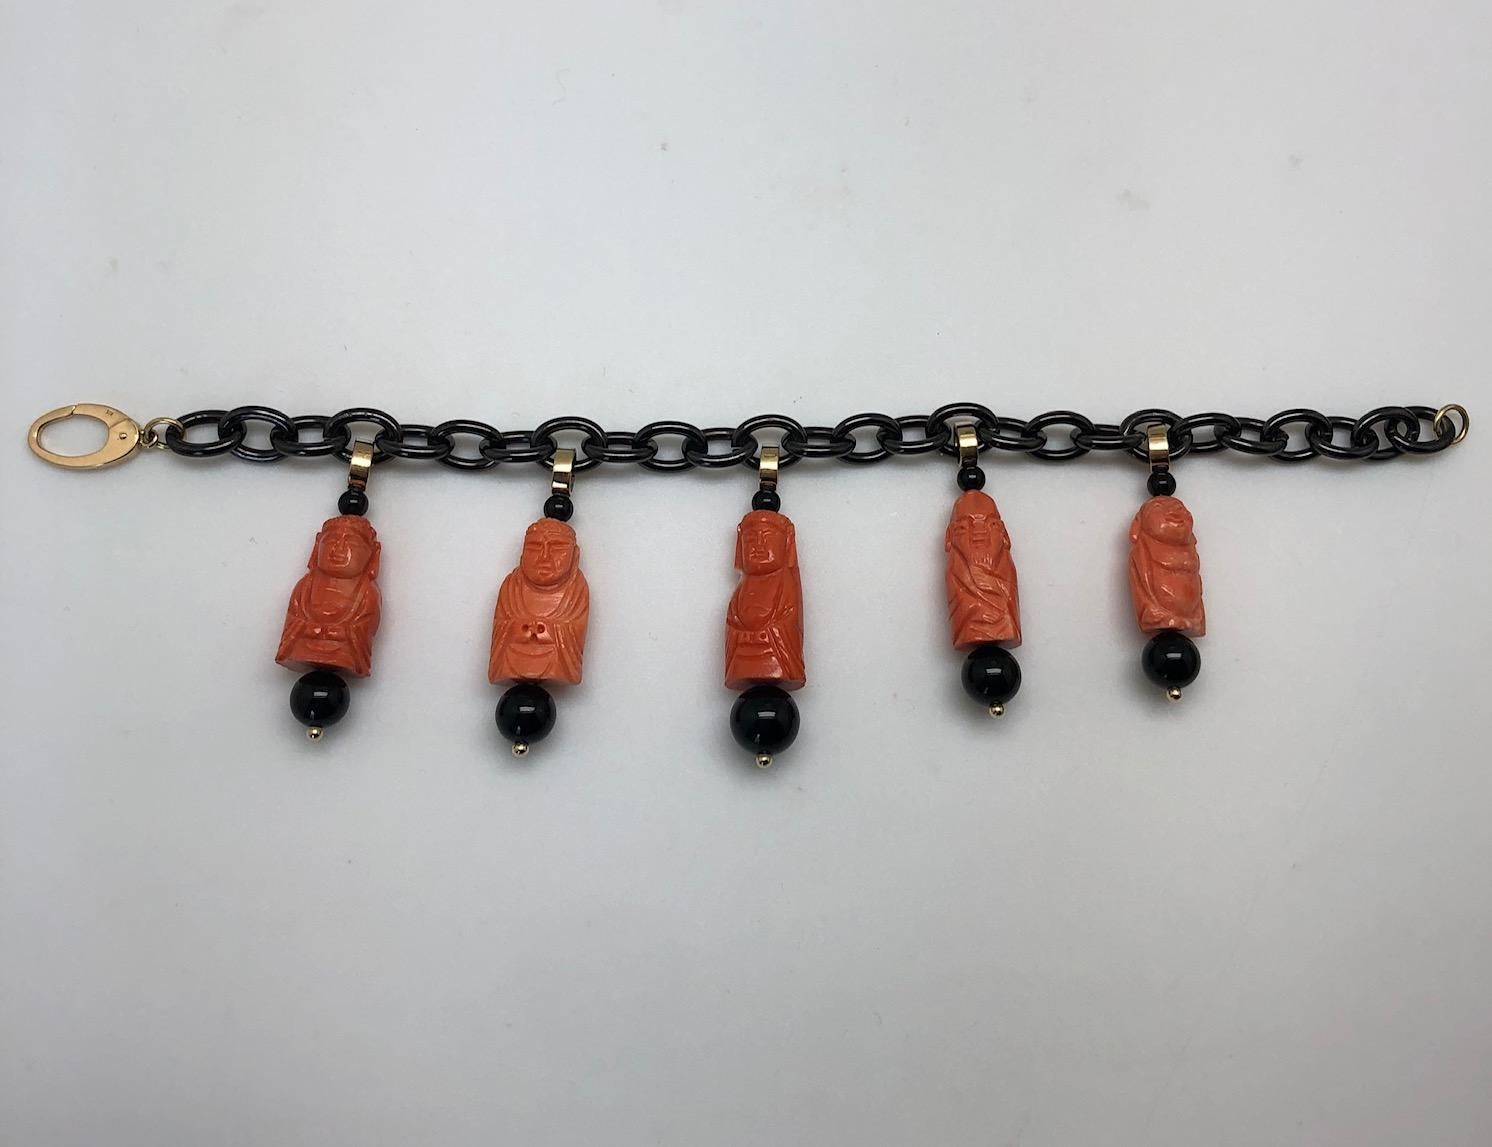 This fun charm bracelet is made of blackened stainless steel links and features 5 Mediterranean coral charms that have been hand carved into happy Buddhas and deities. Set with onyx beads, 18k yellow gold accents and an 18k yellow gold clasp, this